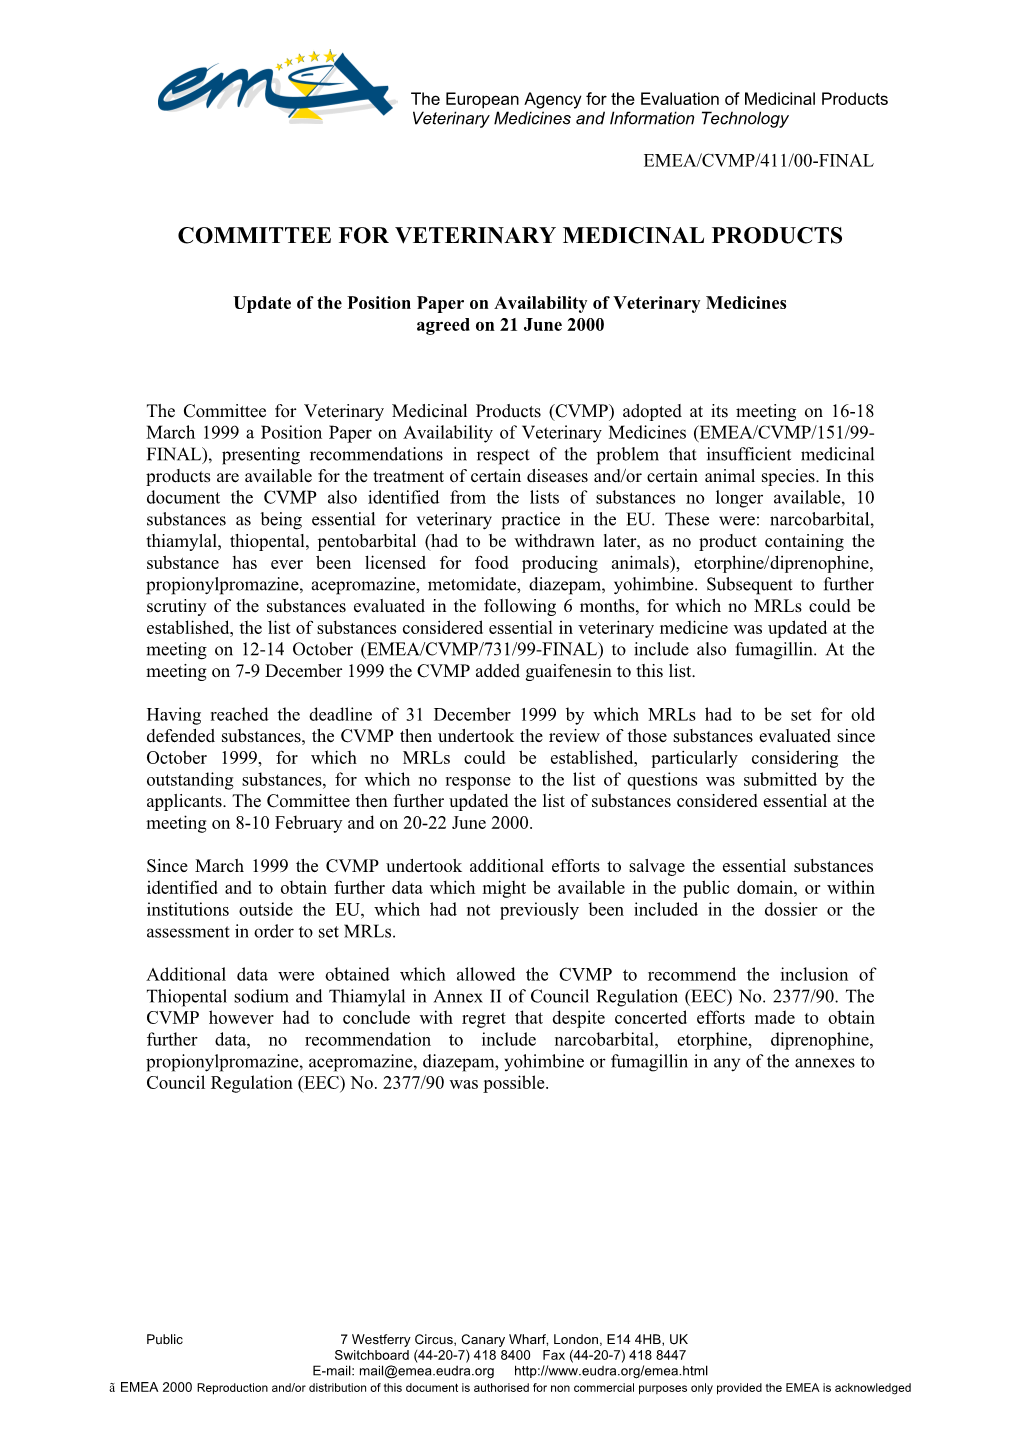 Position Paper on Availability of Veterinary Medicines Agreed on 21 June 2000